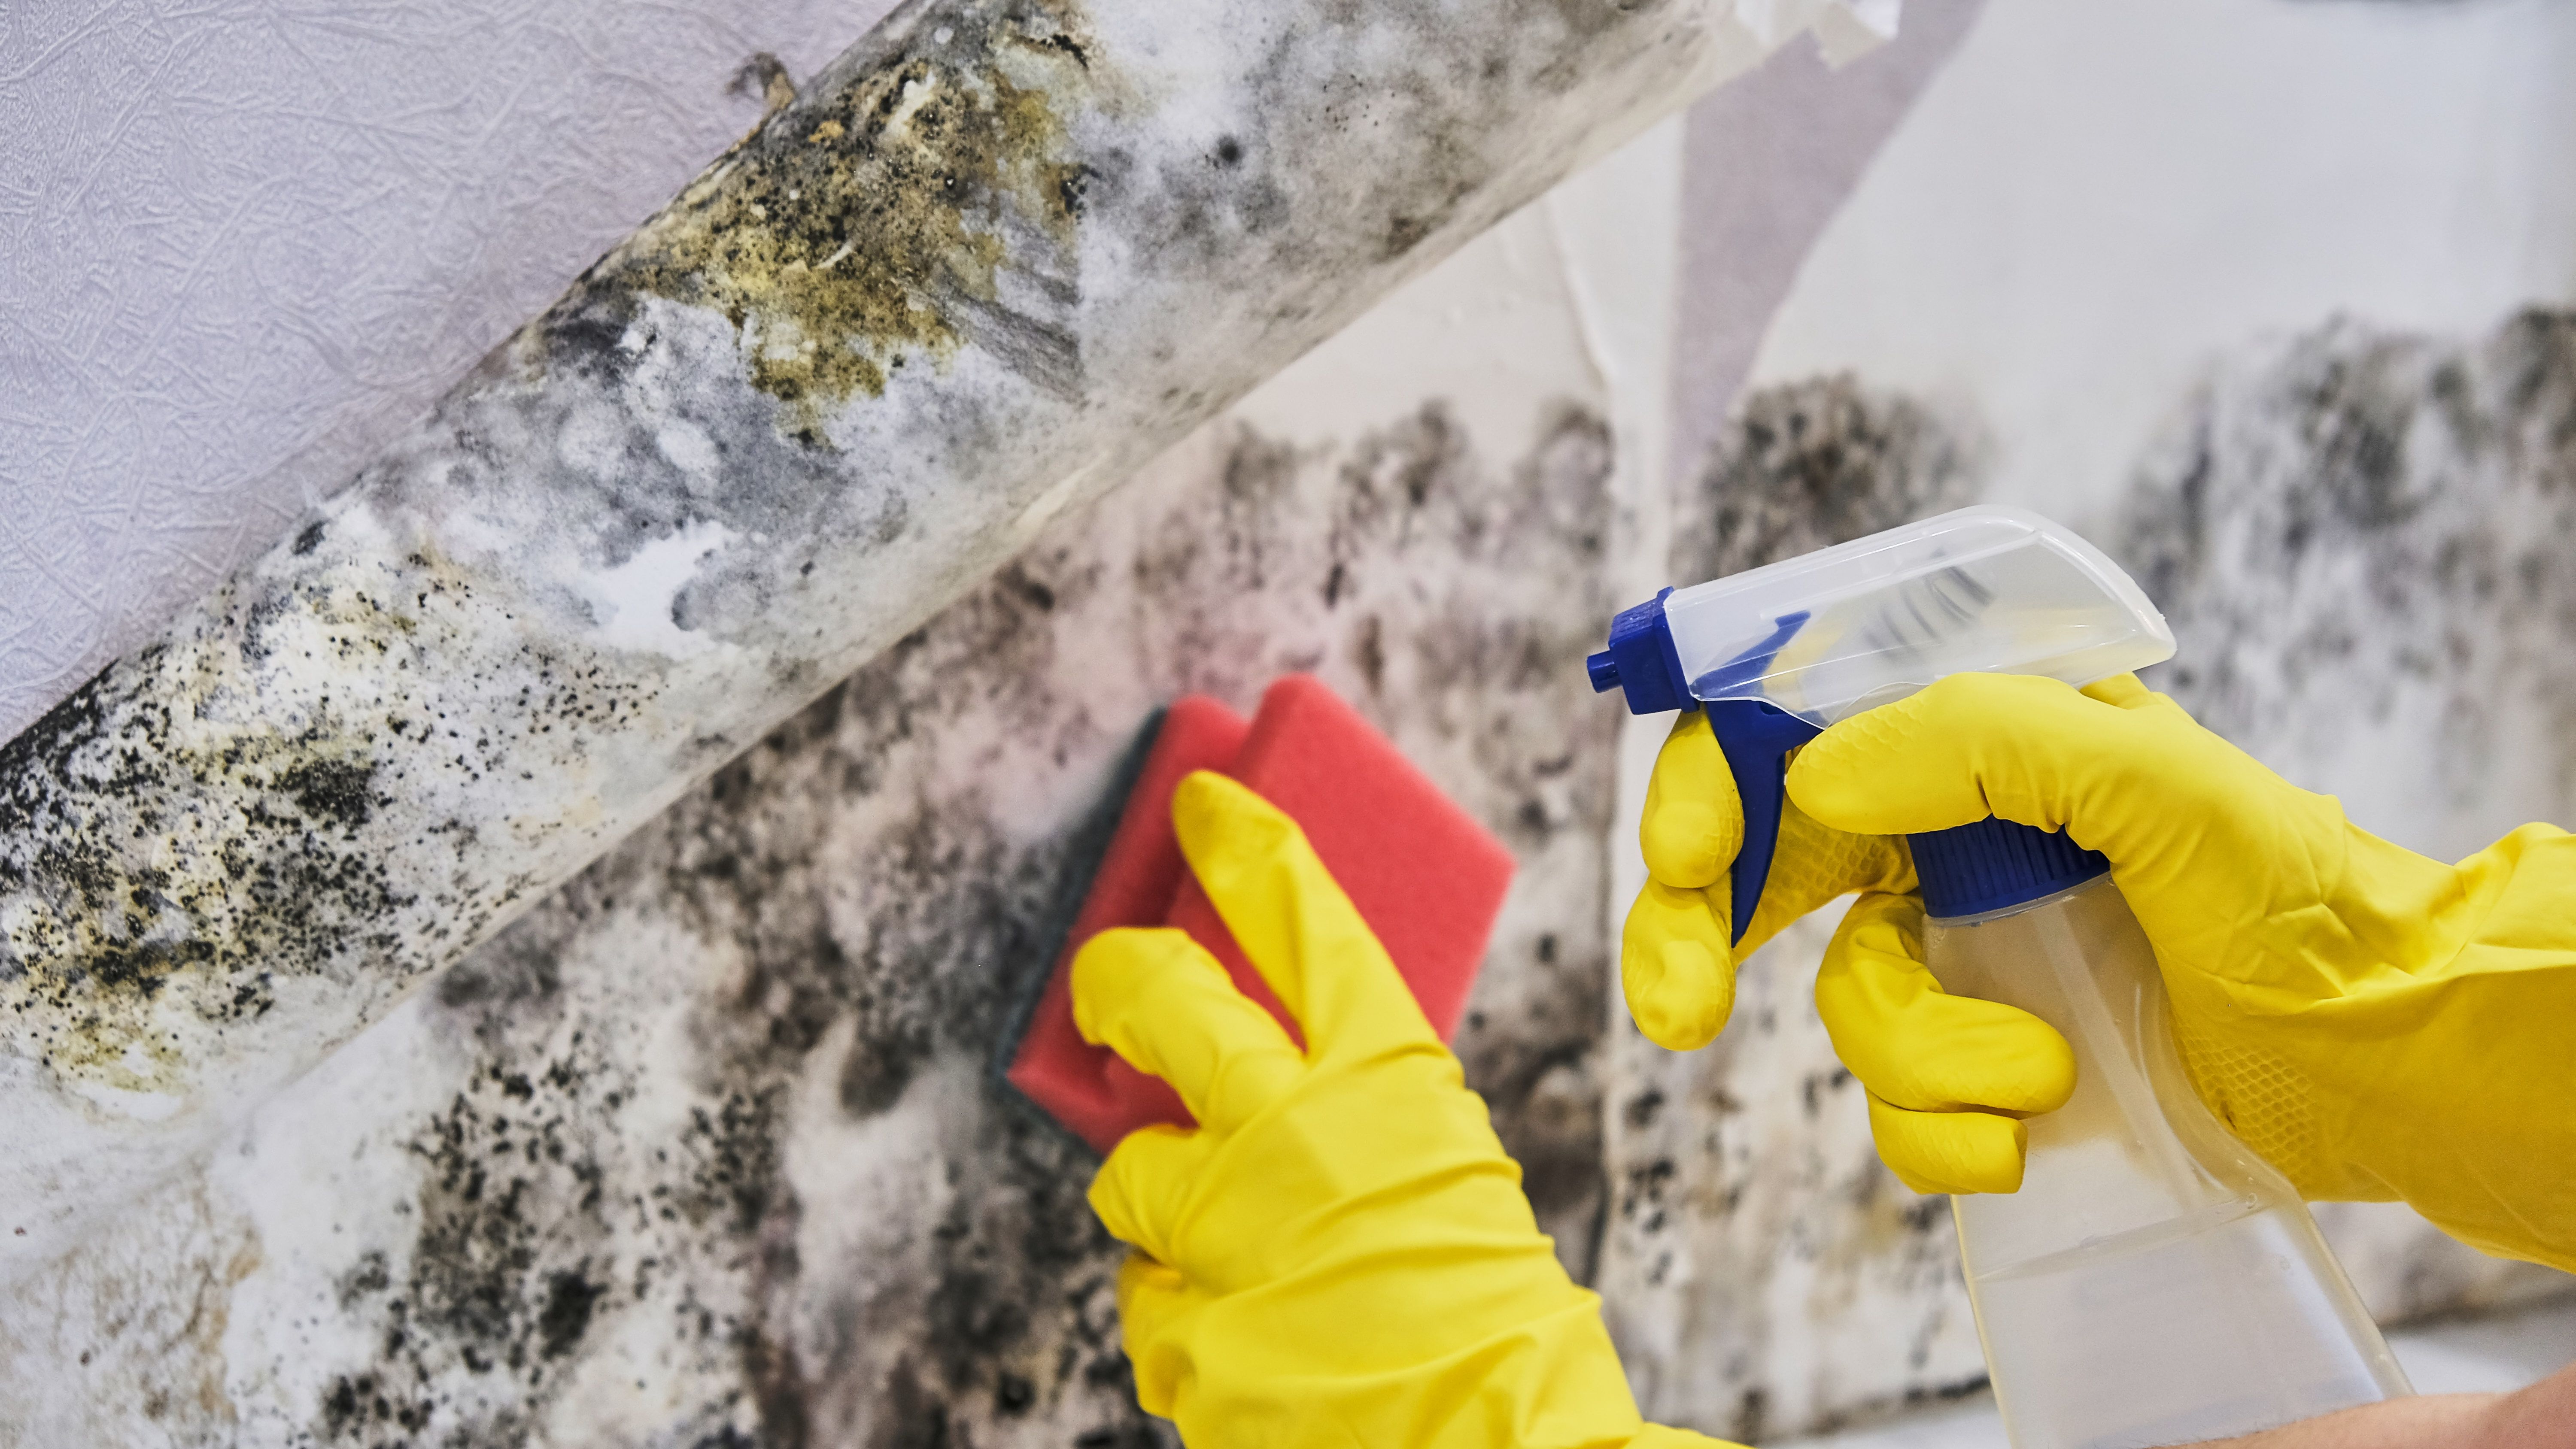 How To Get Rid of Mold in the House - Mold Cleaning Tips